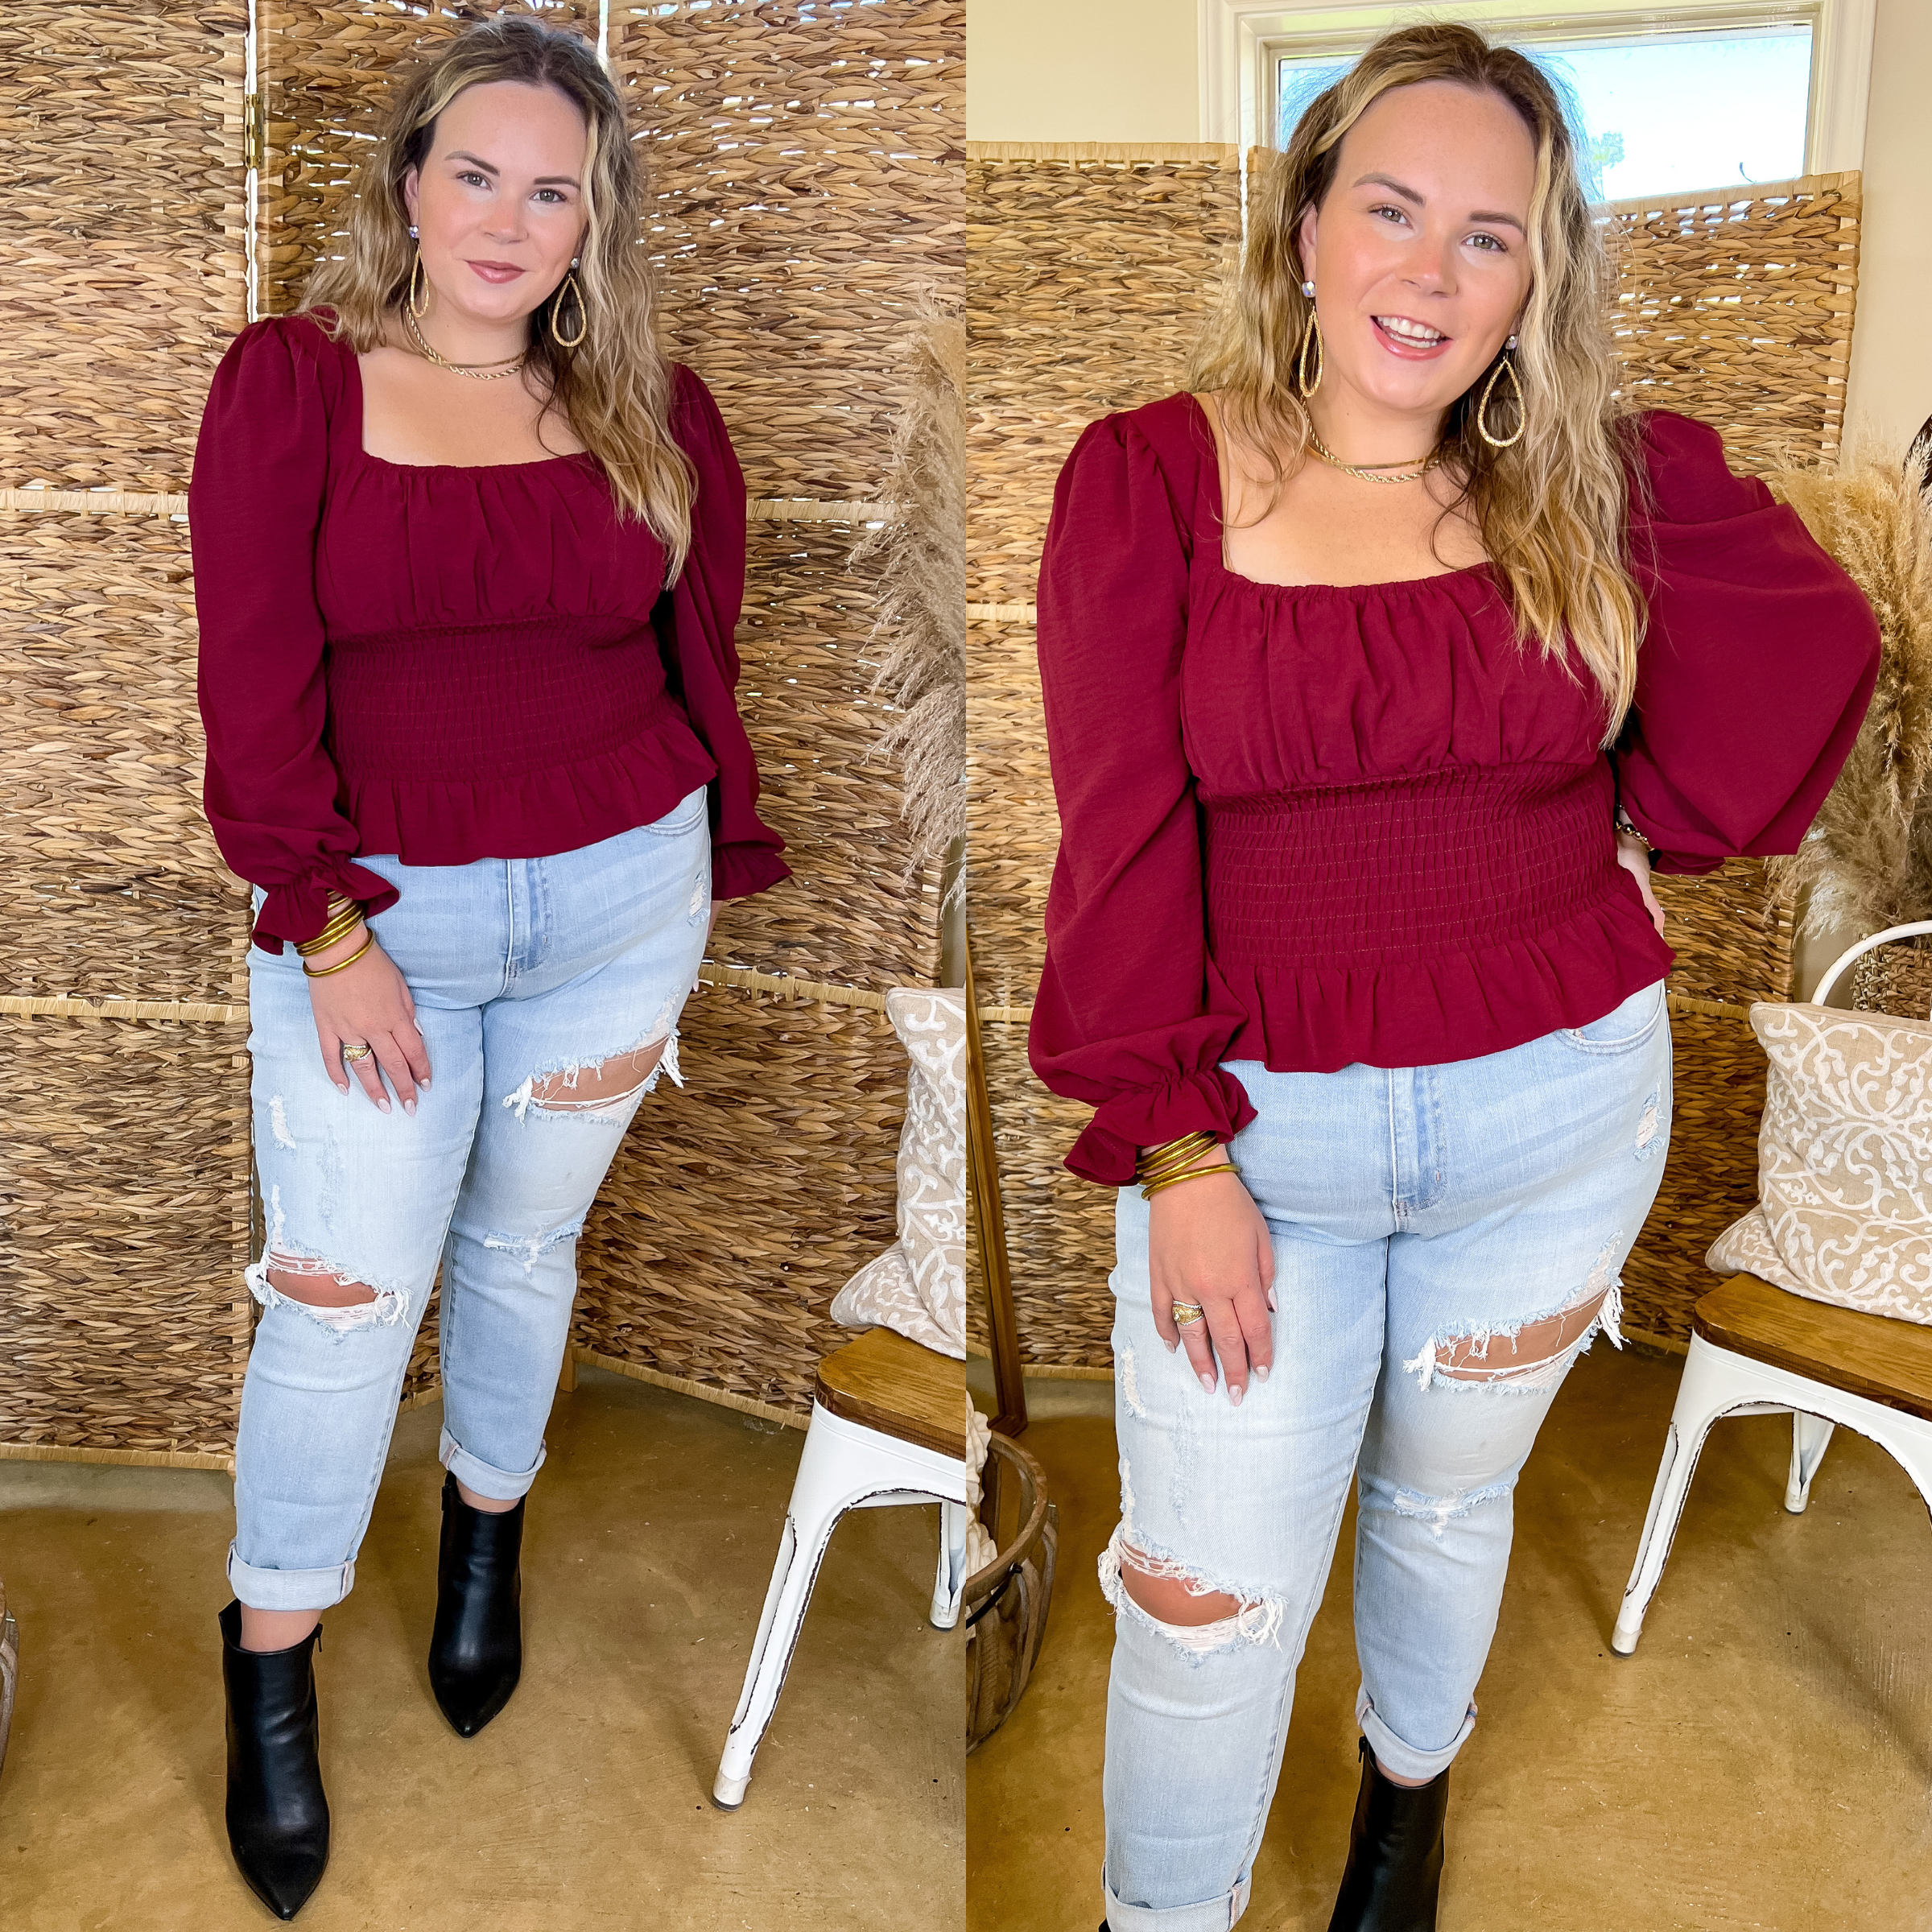 Model is wearing a maroon top with long sleeves, a square neckline, and a smocked bodice. Model has it paired with distressed boyfriend jeans, black booties, and gold jewelry.